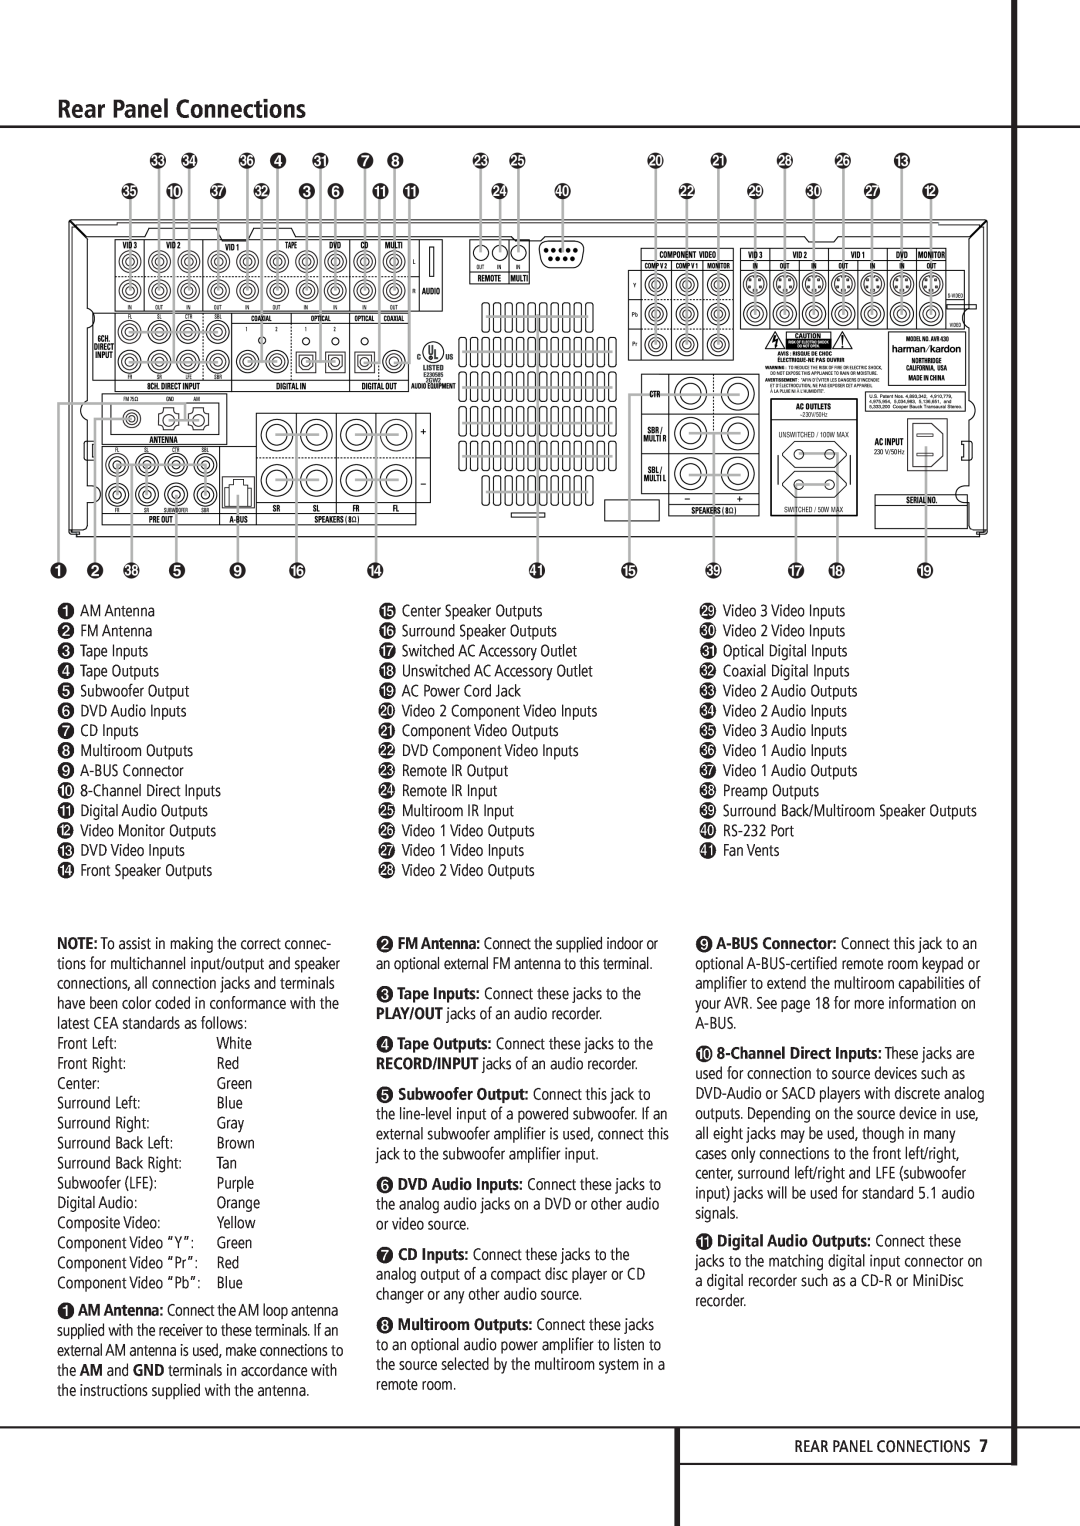 Harman-Kardon AVR 430 owner manual Rear Panel Connections, Digital Audio Outputs: Connect these 